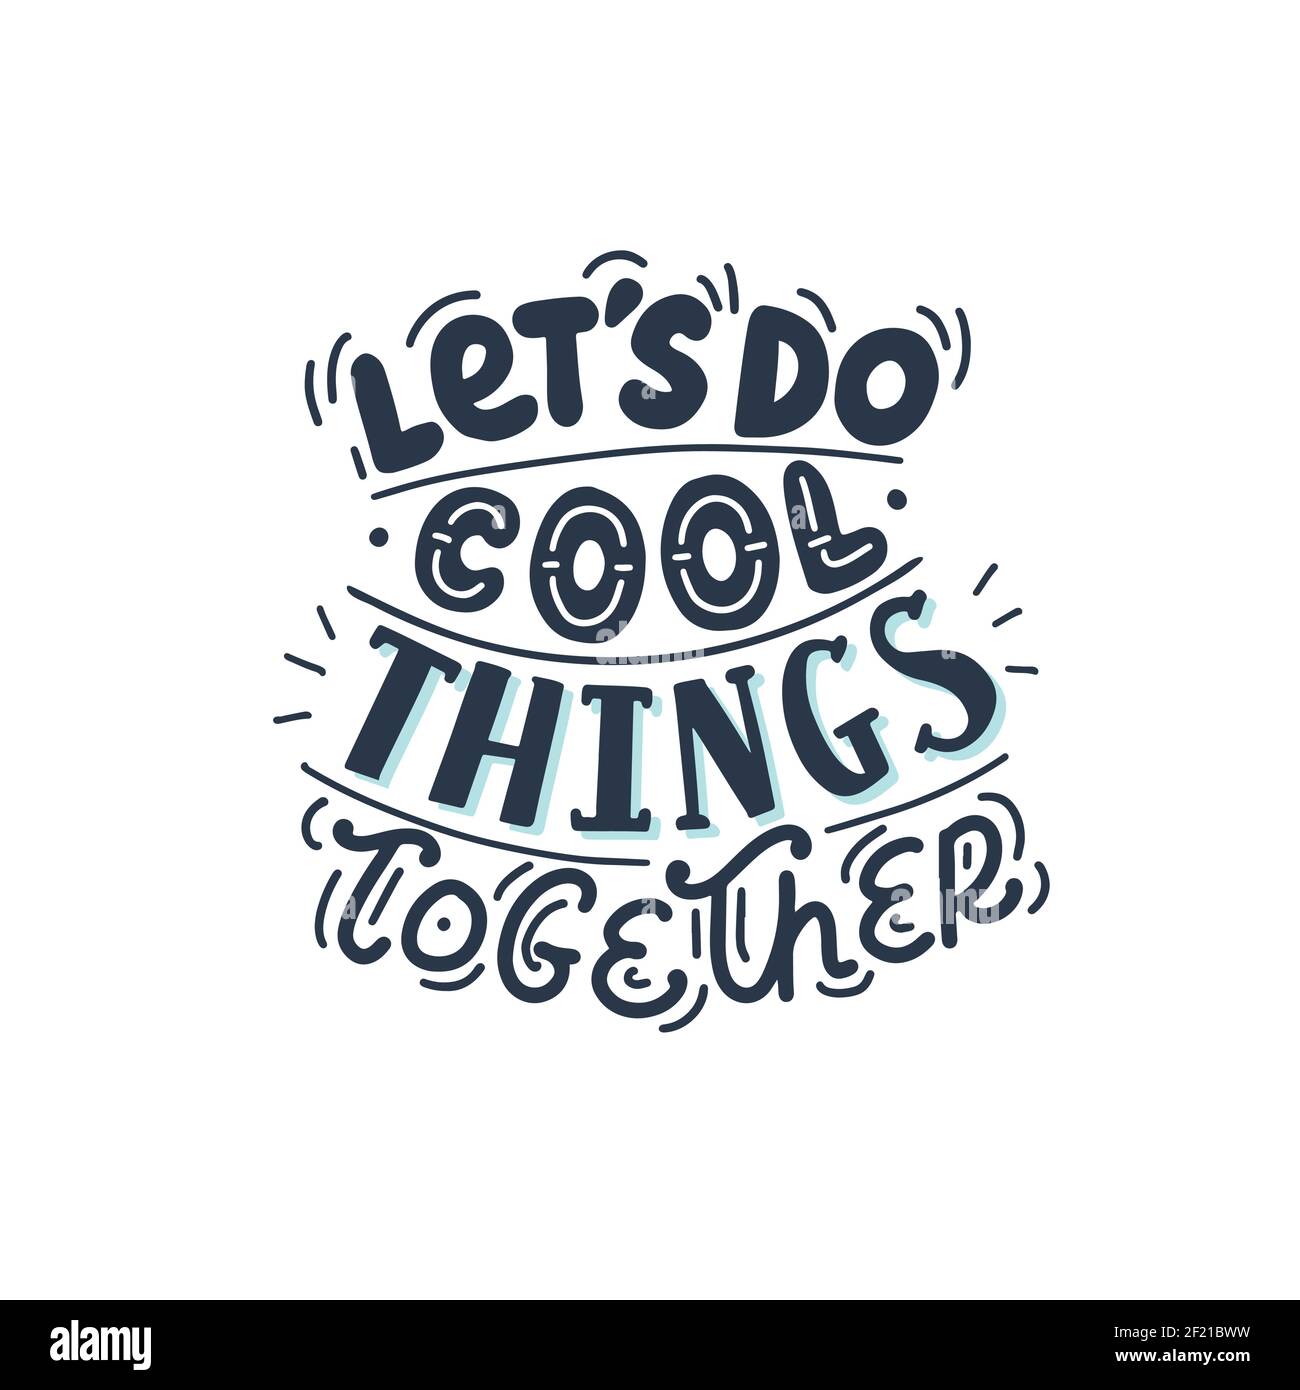 Let's do cool things together, cute hand drawn motivational lettering. Vector illustration Stock Vector